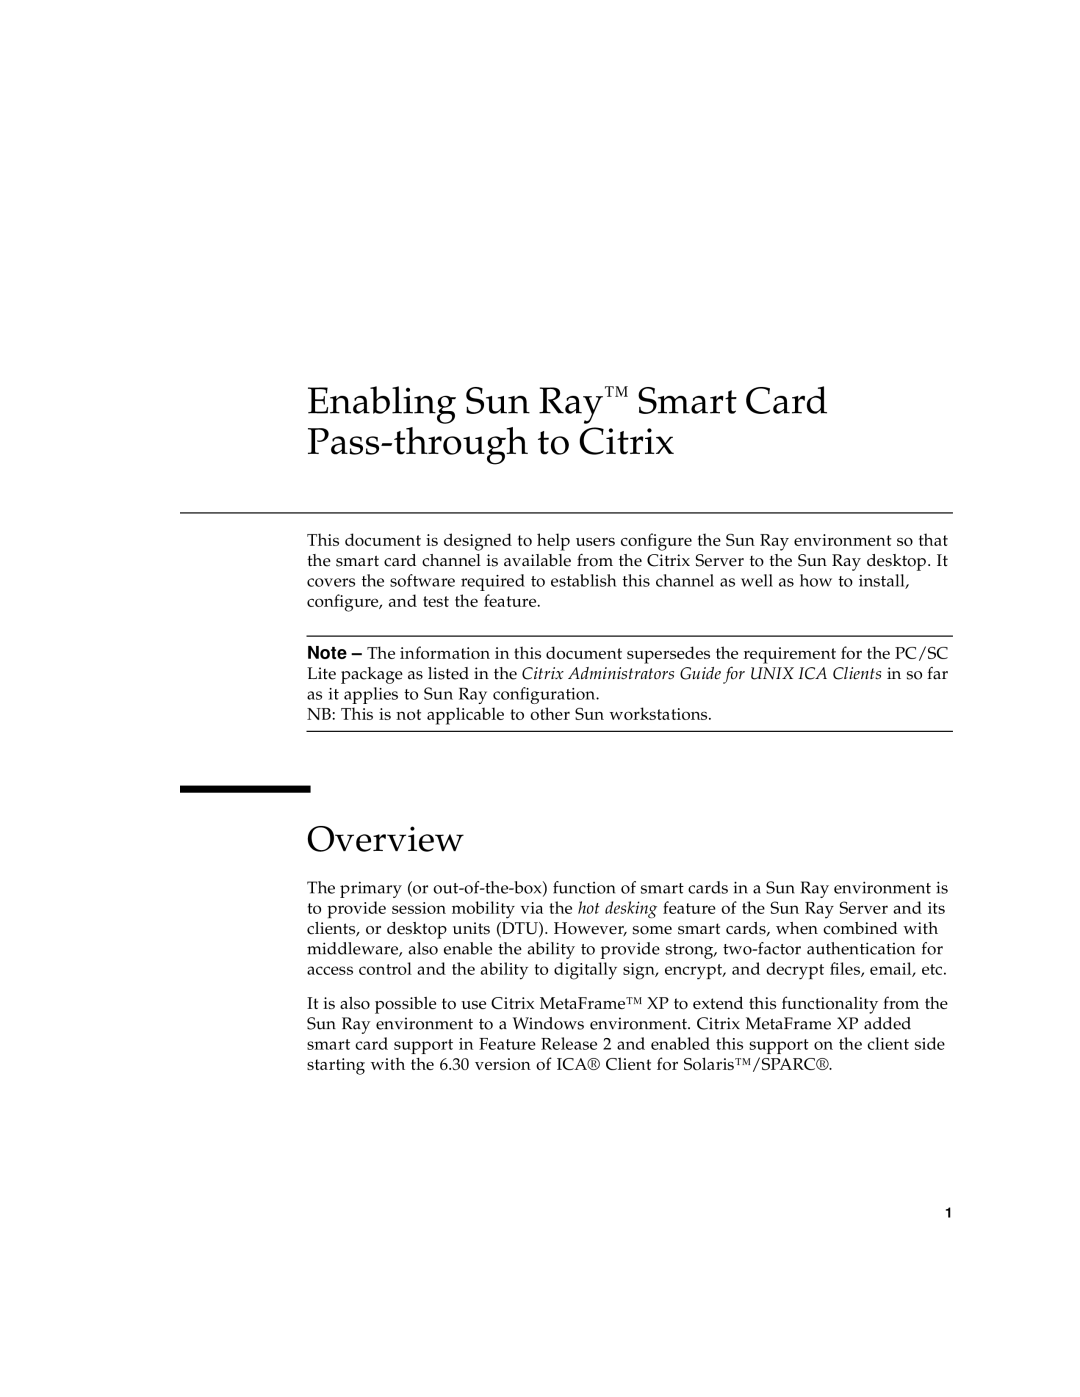 Sun Microsystems Smart Cards, and Citrix manual Overview, Enabling Sun Ray Smart Card Pass-through to Citrix 